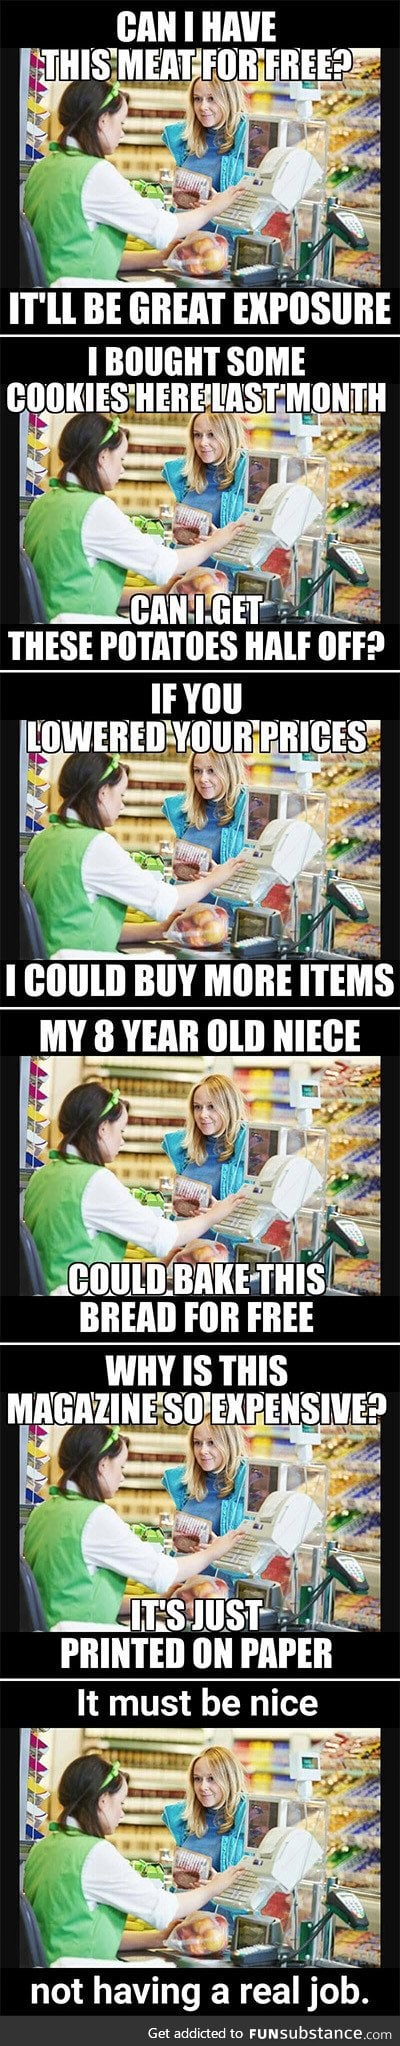 If people talked to store owners the way they talk to artists